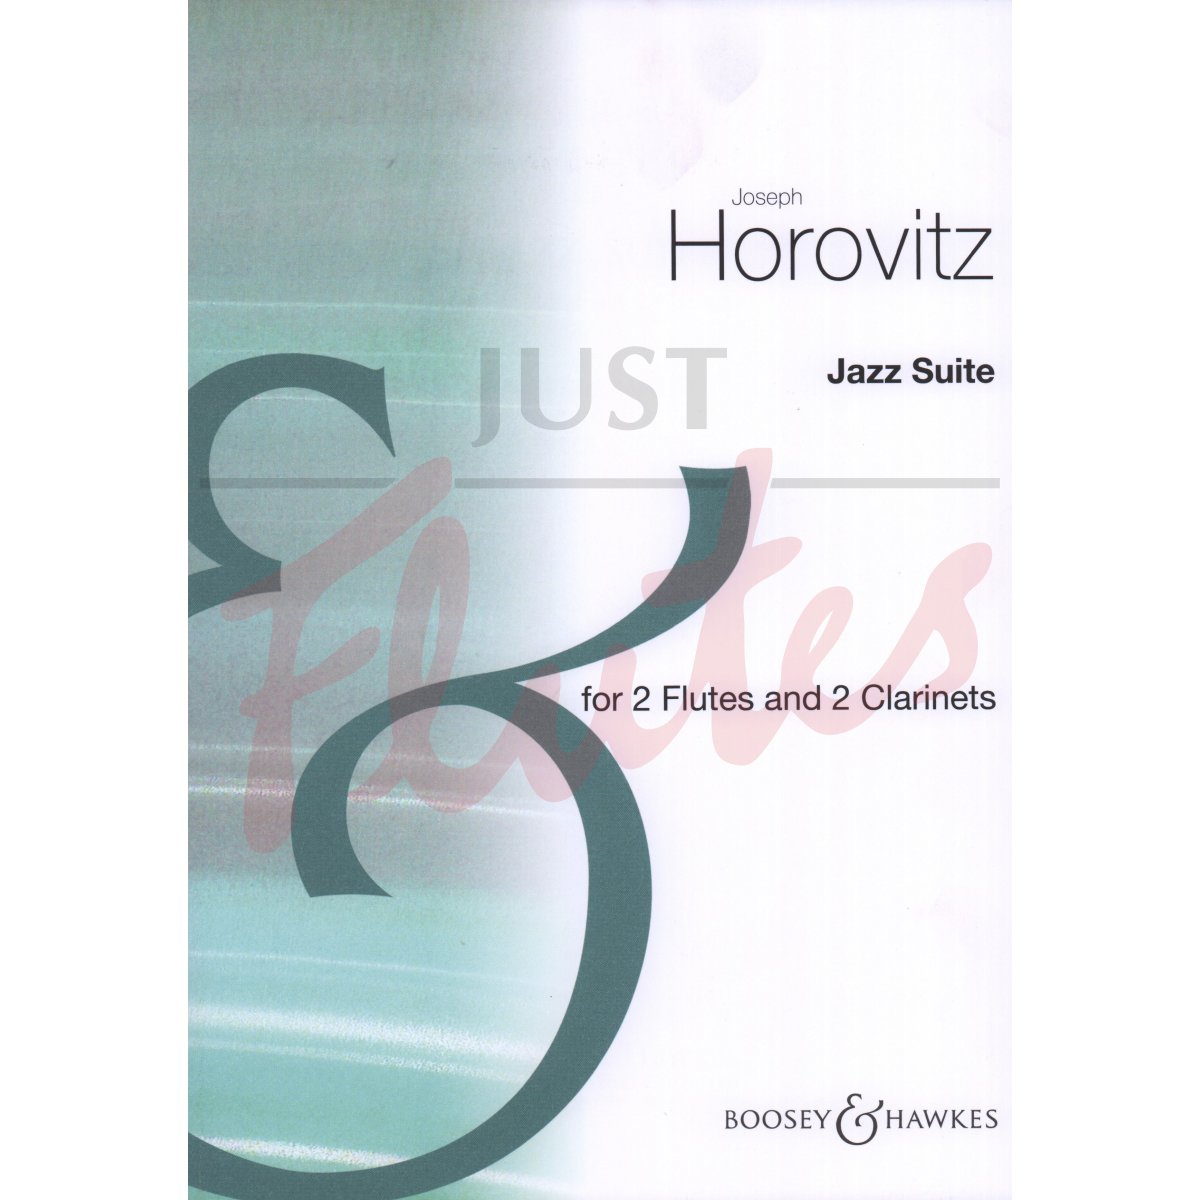 Jazz Suite for Two Flutes and Two Clarinets